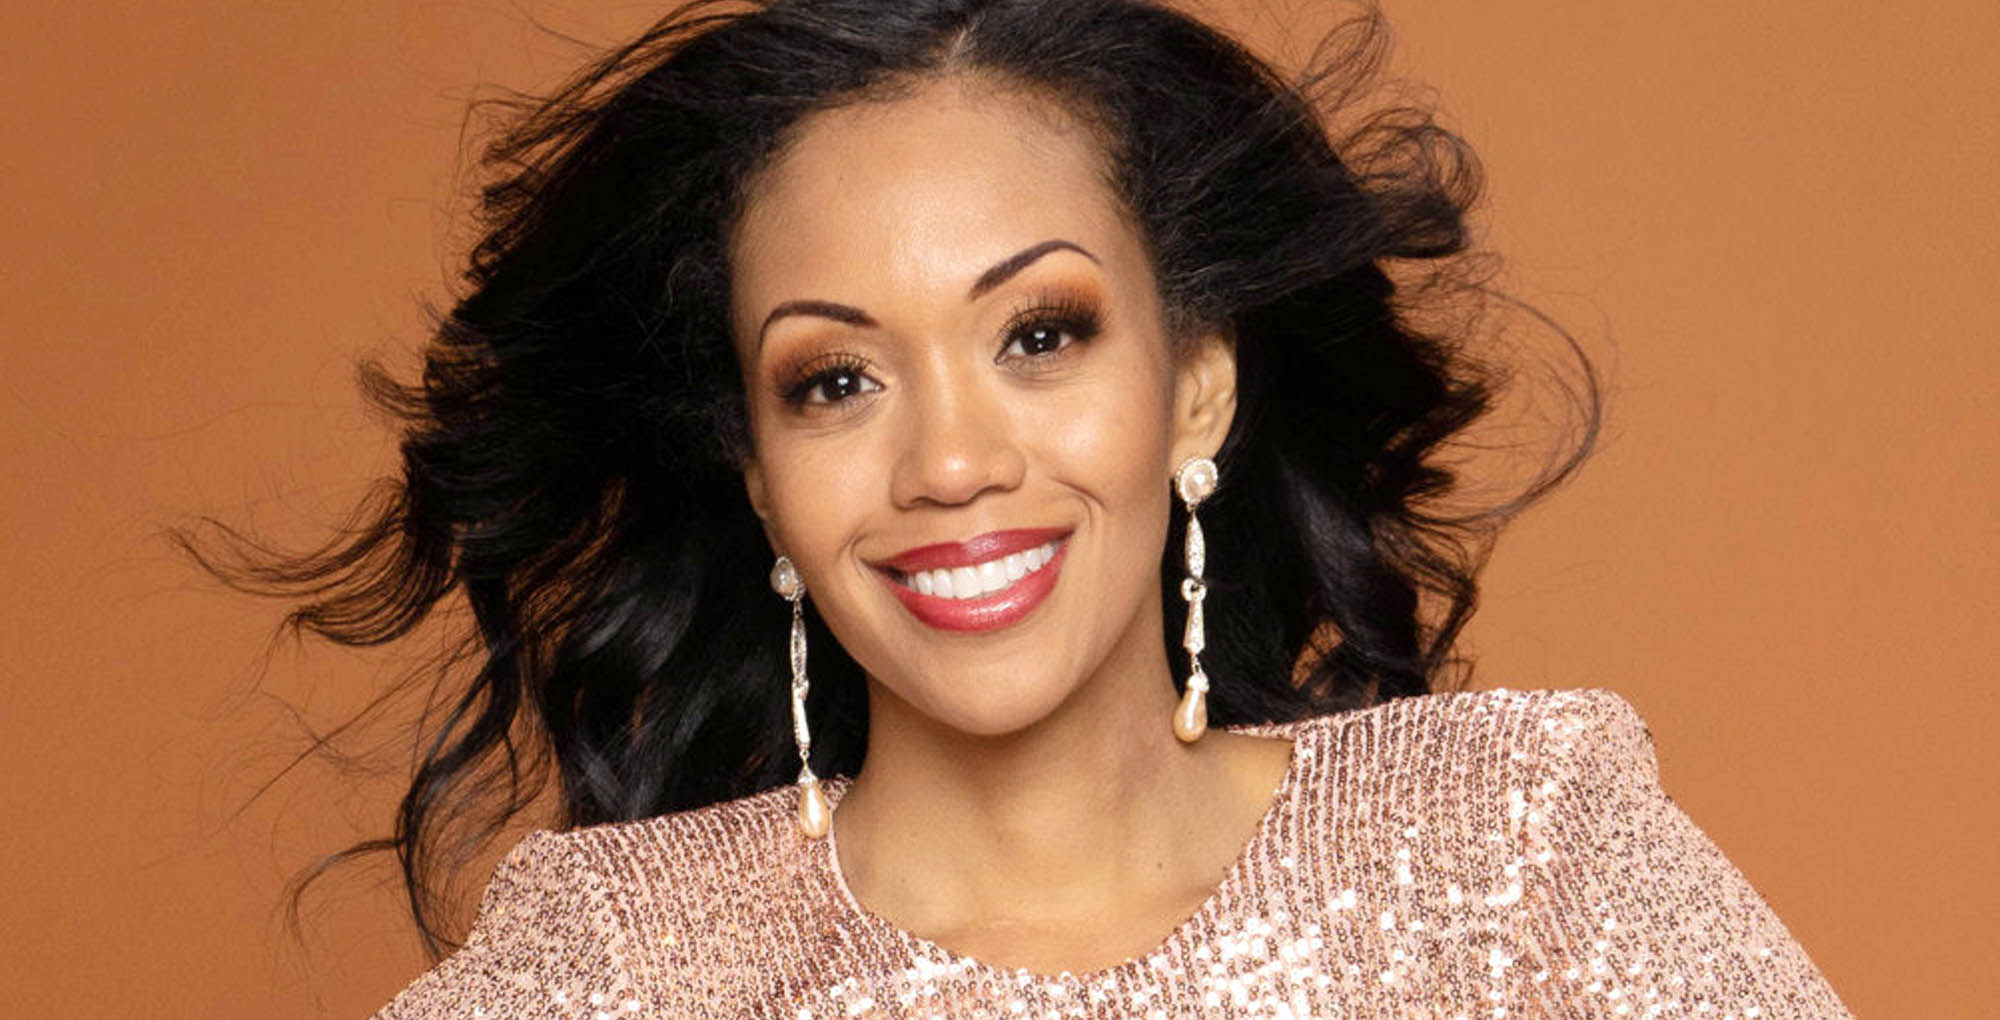 young and the restless mishael morgan smiling against gold background.